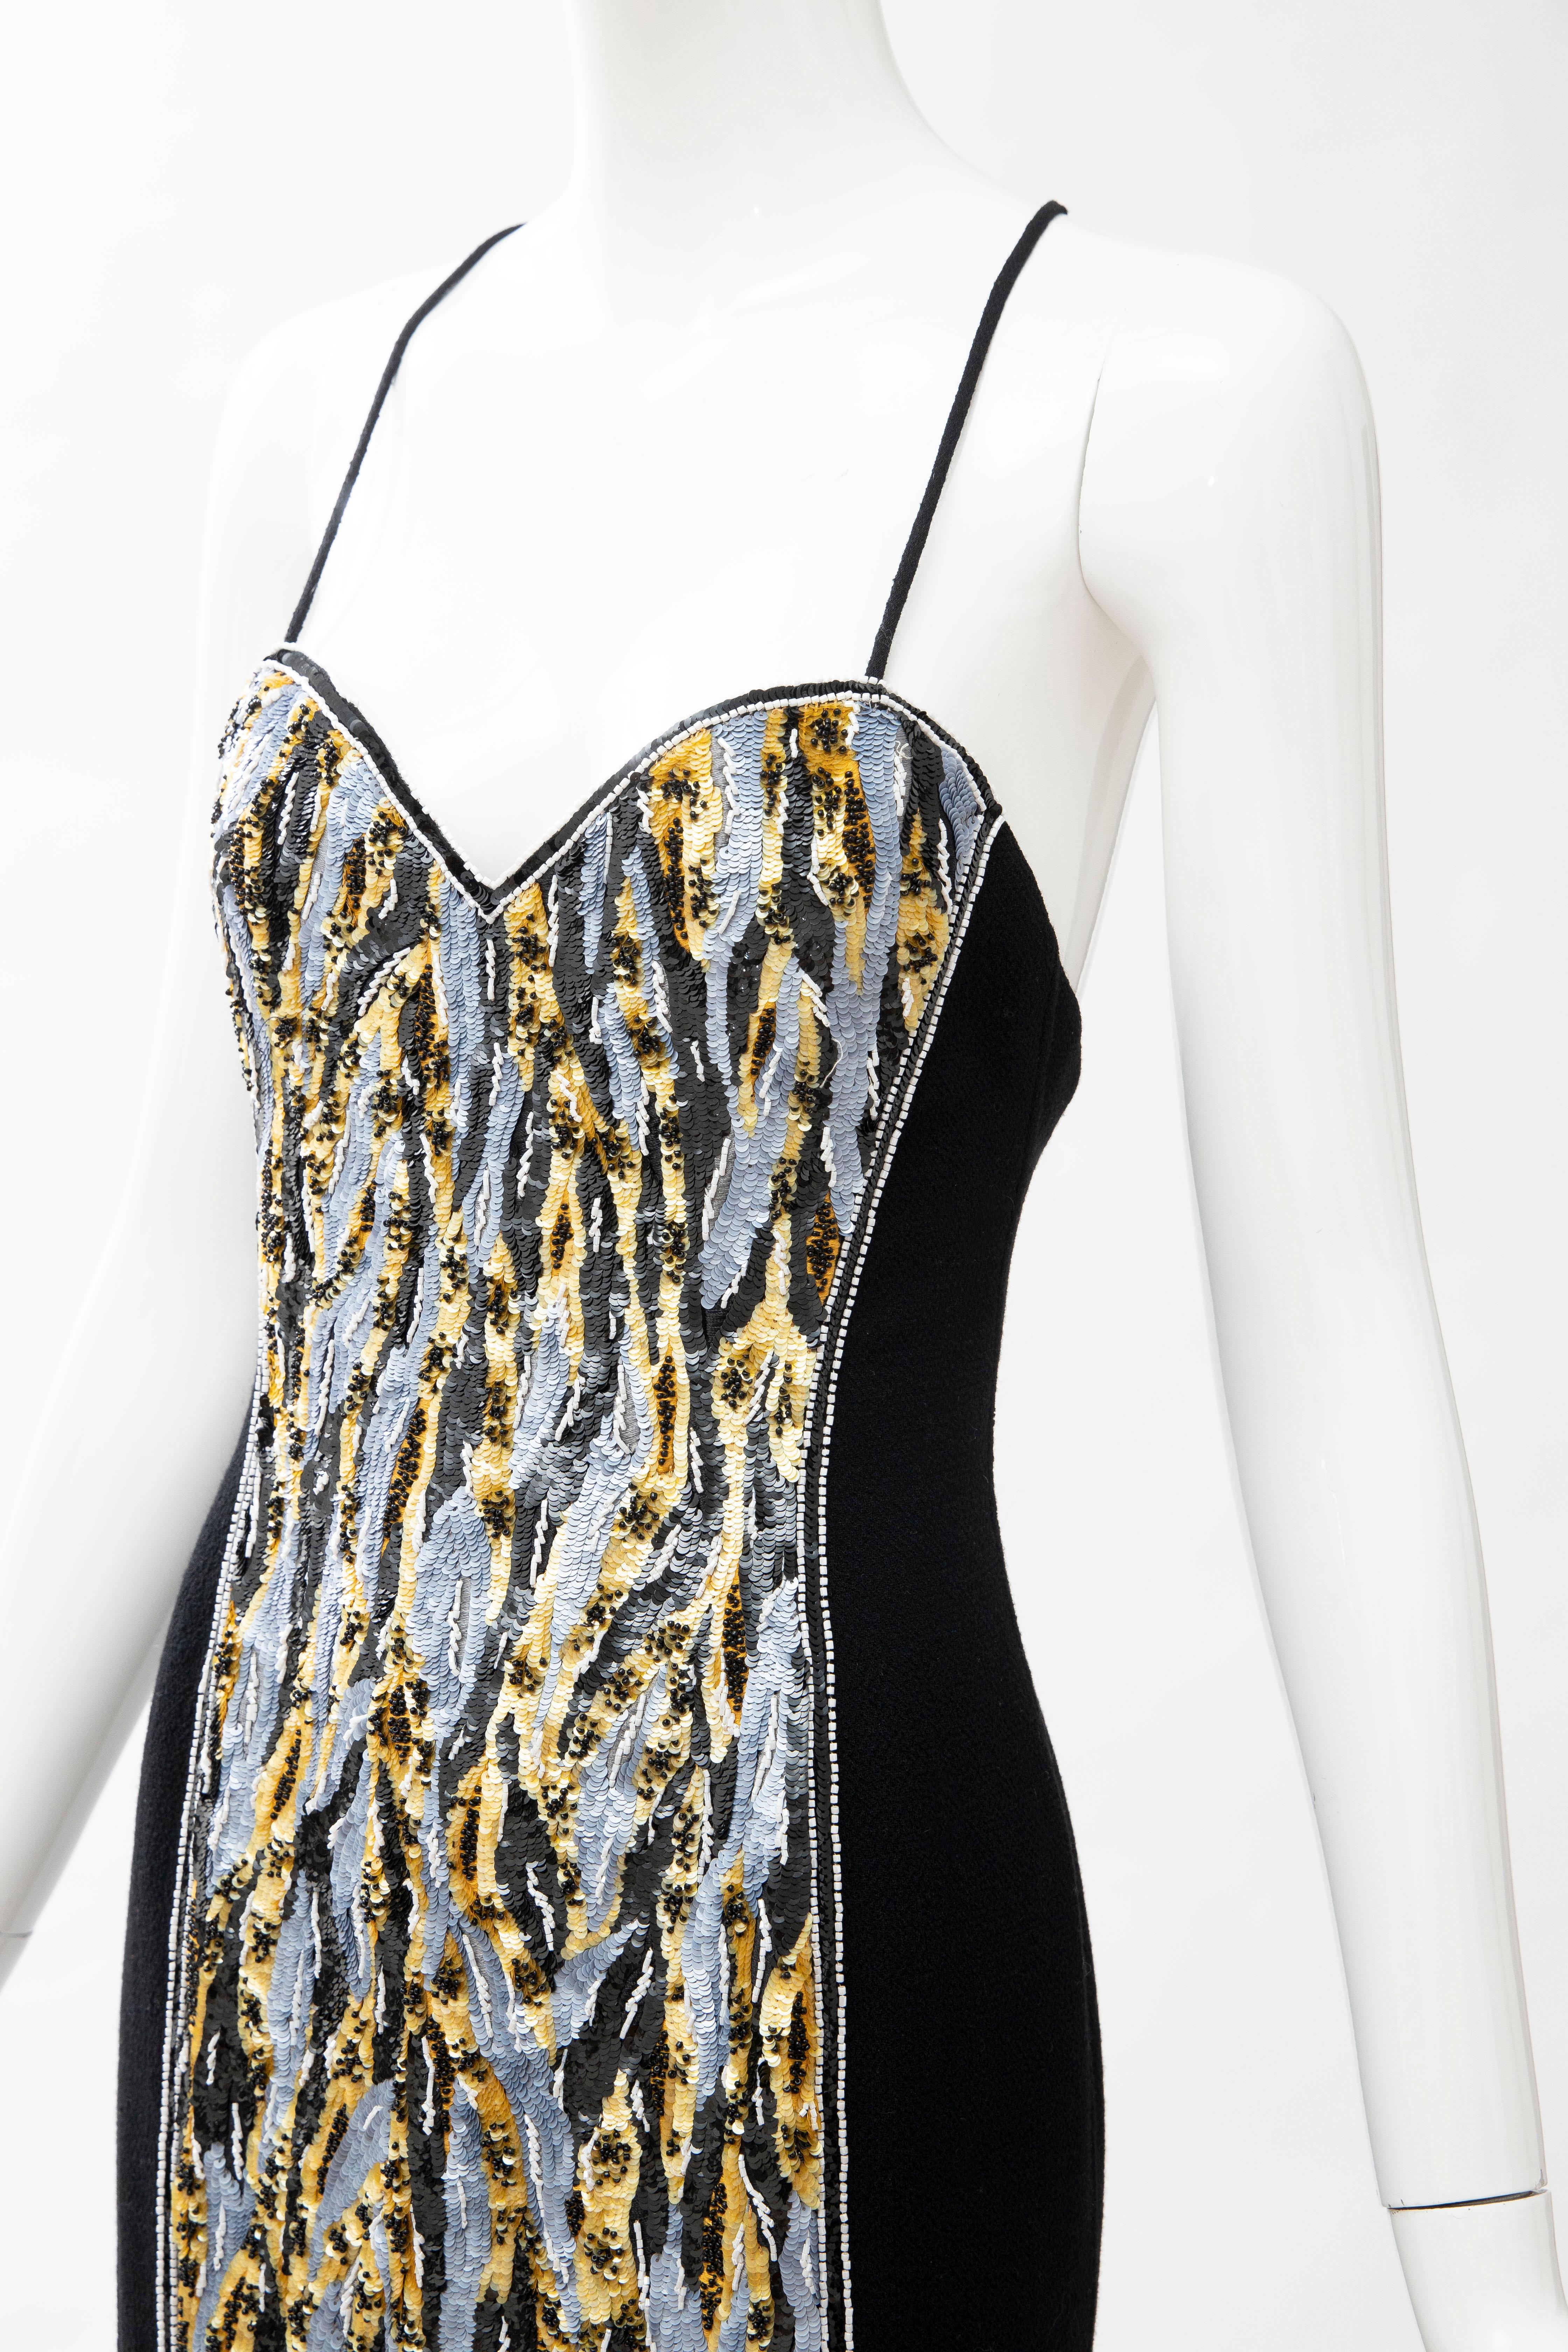 Geoffrey Beene Black Wool Crepe Embroidered Sequins Dress Ensemble, Circa 1990's For Sale 15